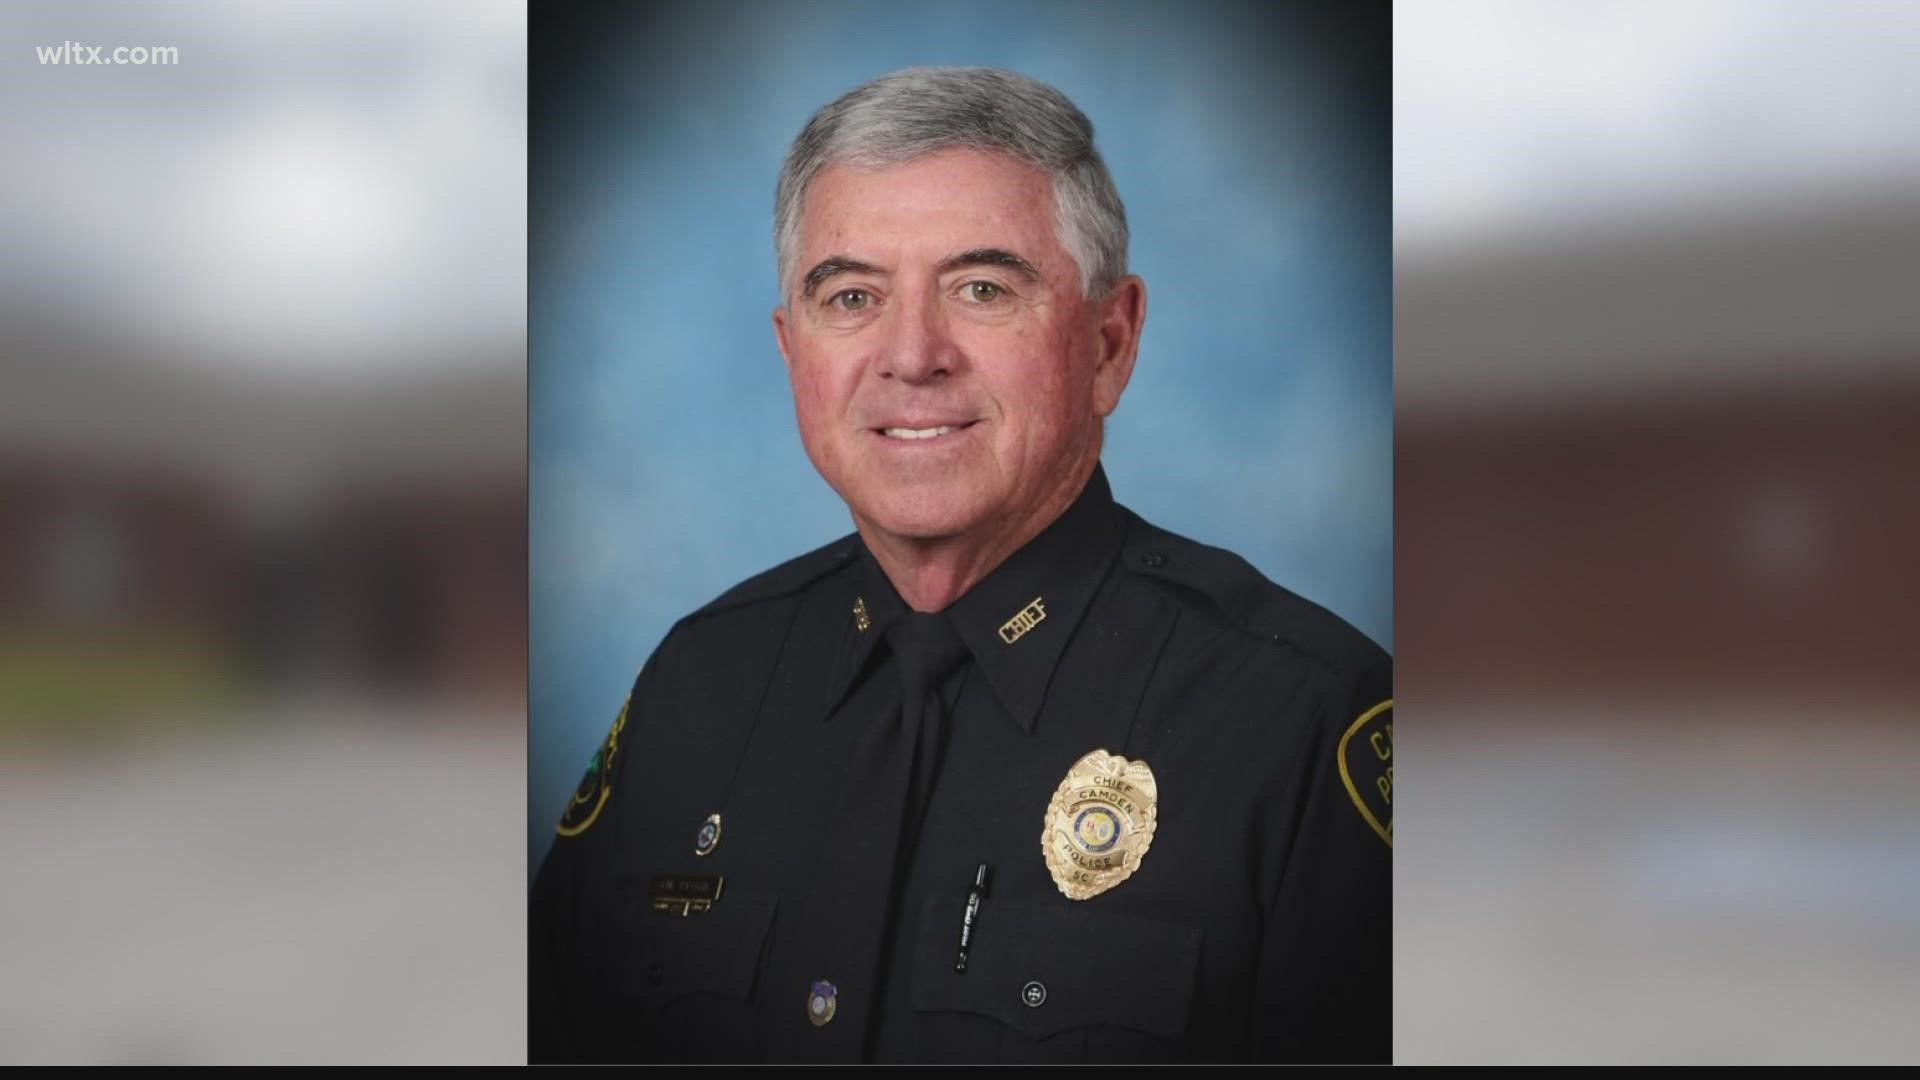 Floyd had over 50 years experience in law enforcement and will retire Feb. 1, 2023.